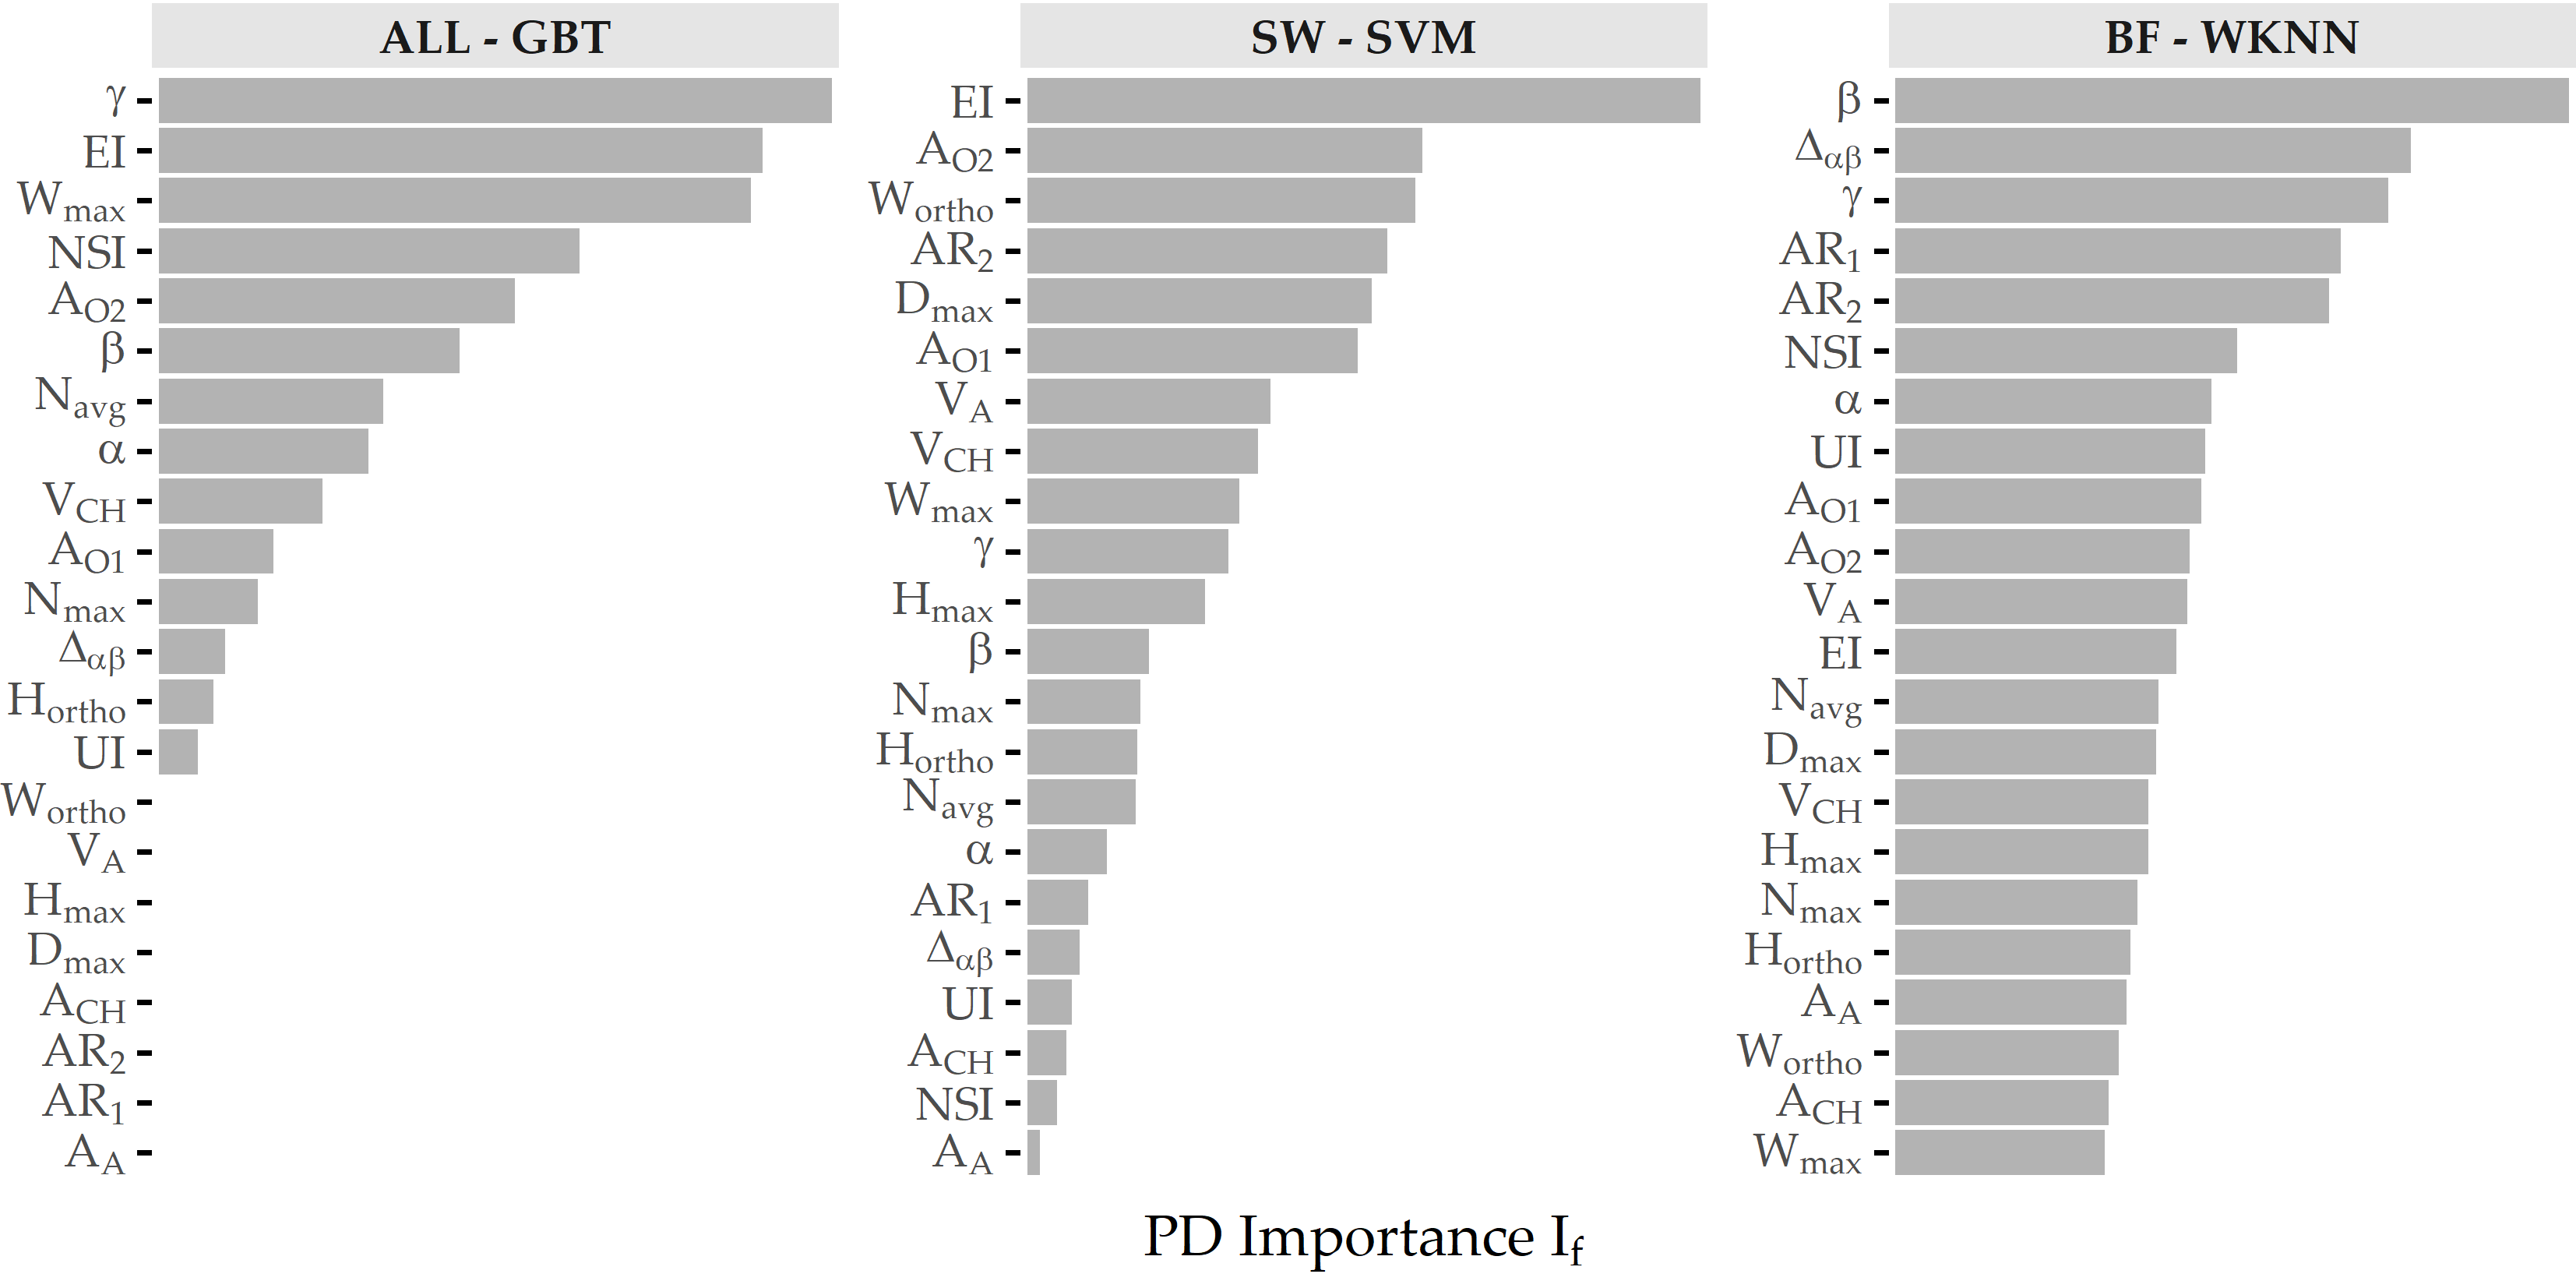 Relative PD importance (ANEUR). PD importance for the best model of each data subset. Values are relative to the maximum PD importance. SW = sidewall; BF = bifurcation.